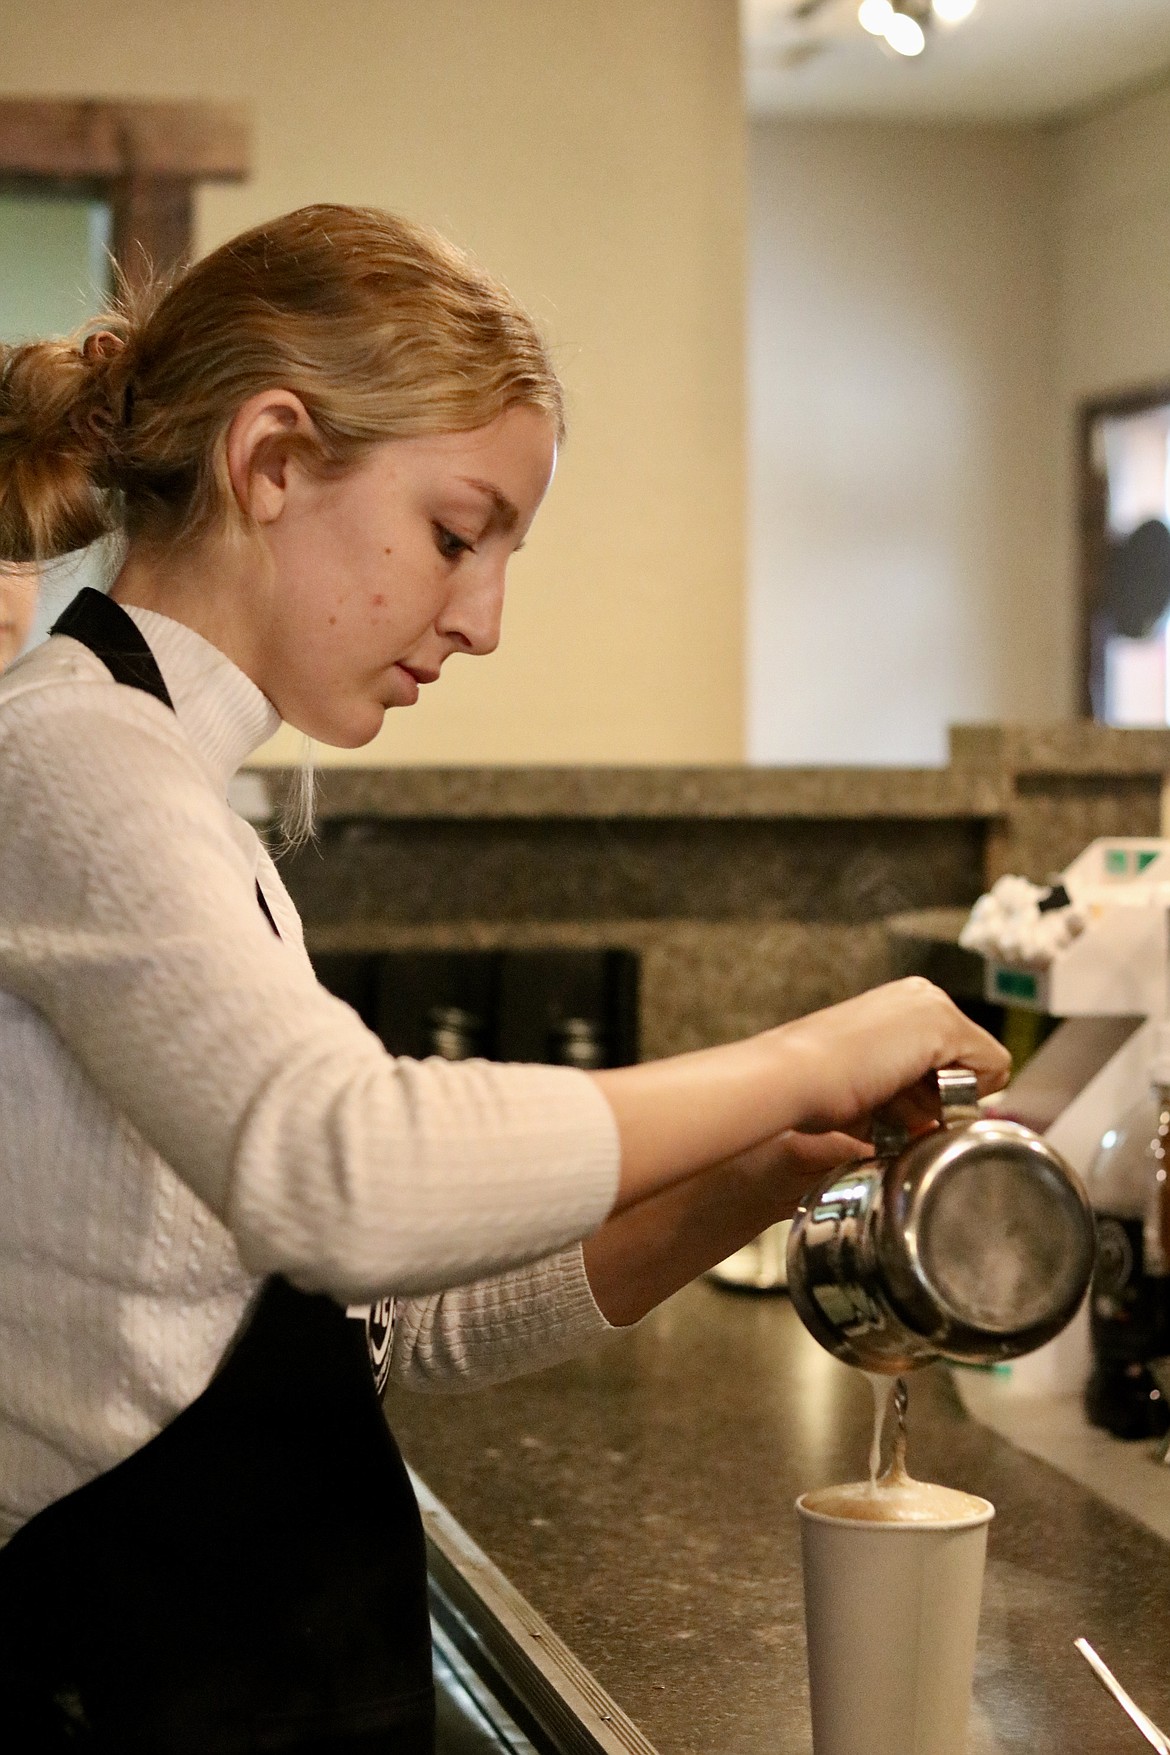 Baylie Miller of Lyfe Coffee Roasters and Public House in downtown Coeur d'Alene makes a beverage on Monday. The coffee shop, formerly known as Calypsos Coffee Roasters, reopened under new ownership on Sunday. HANNAH NEFF/Press